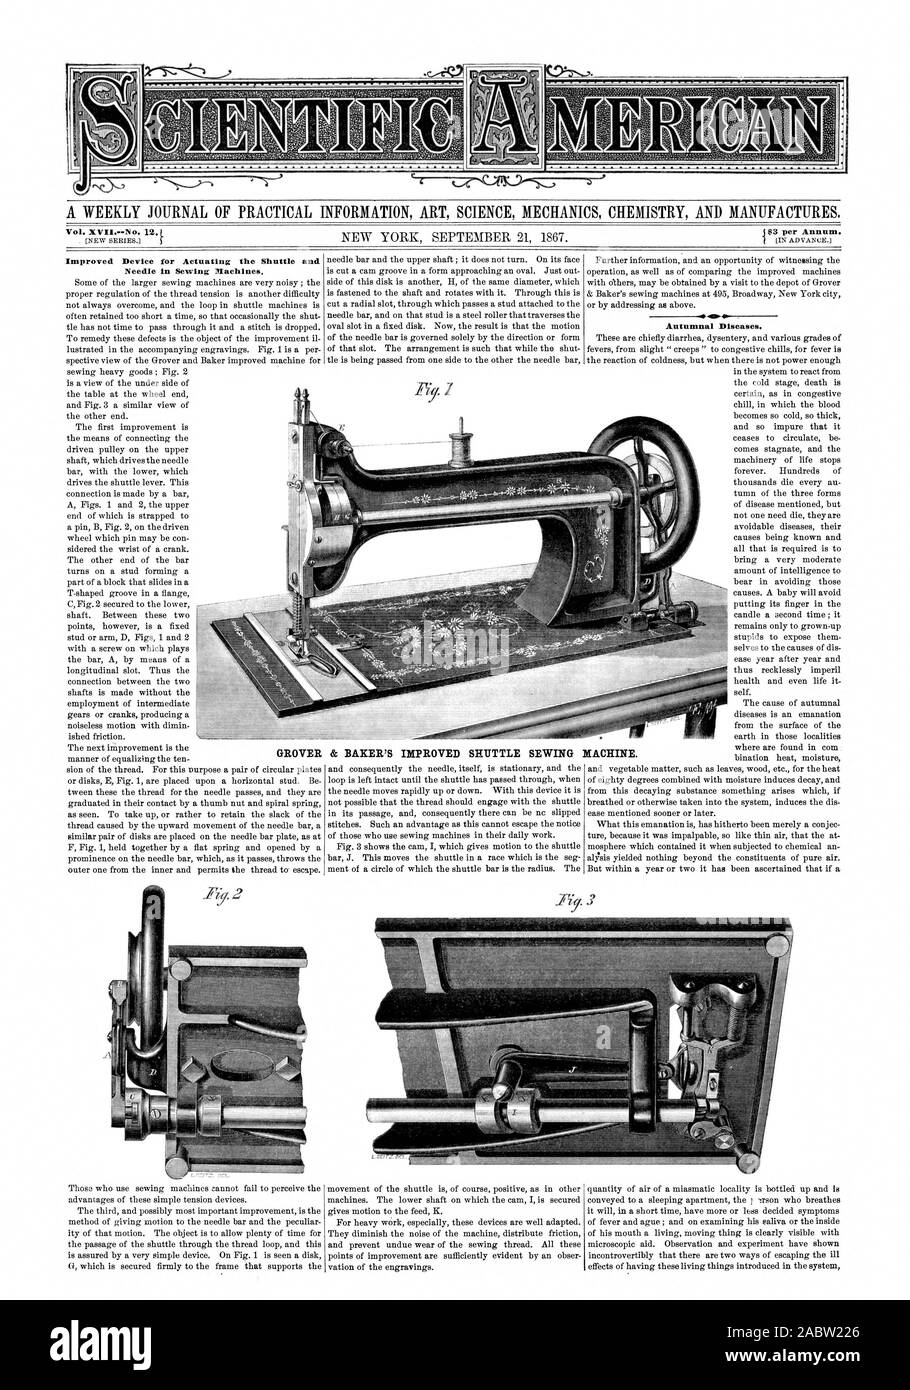 A WEEKLY JOURNAL OF PRACTICAL INFORMATION ART SCIENCE MECHANICS CHEMISTRY AND MANUFACTURES. Improved Device for Actuating the Shuttle and Needle in Sewing Machines. GROVER & BAKER'S IMPROVED SHUTTLE SEWING MACHINE., scientific american, 1867-09-21 Stock Photo